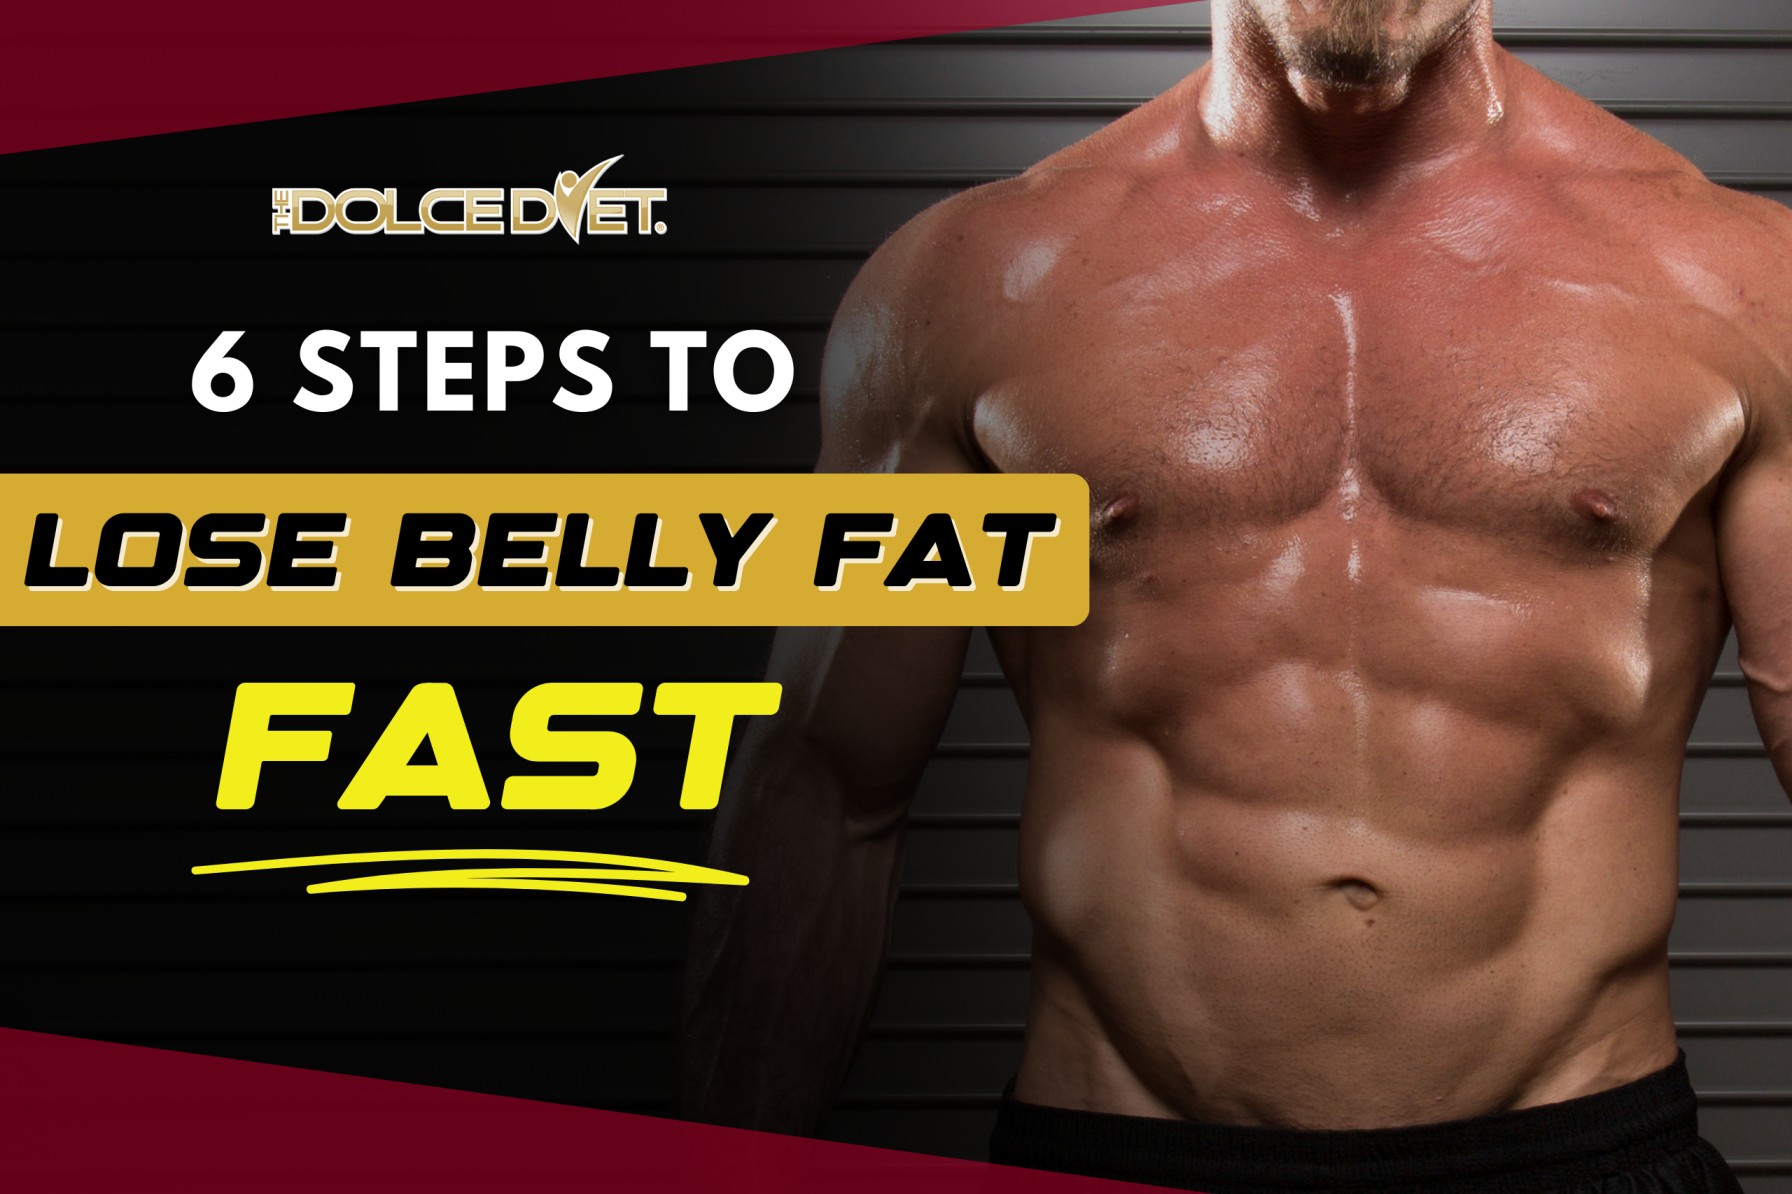 6 steps to lose belly fat fast